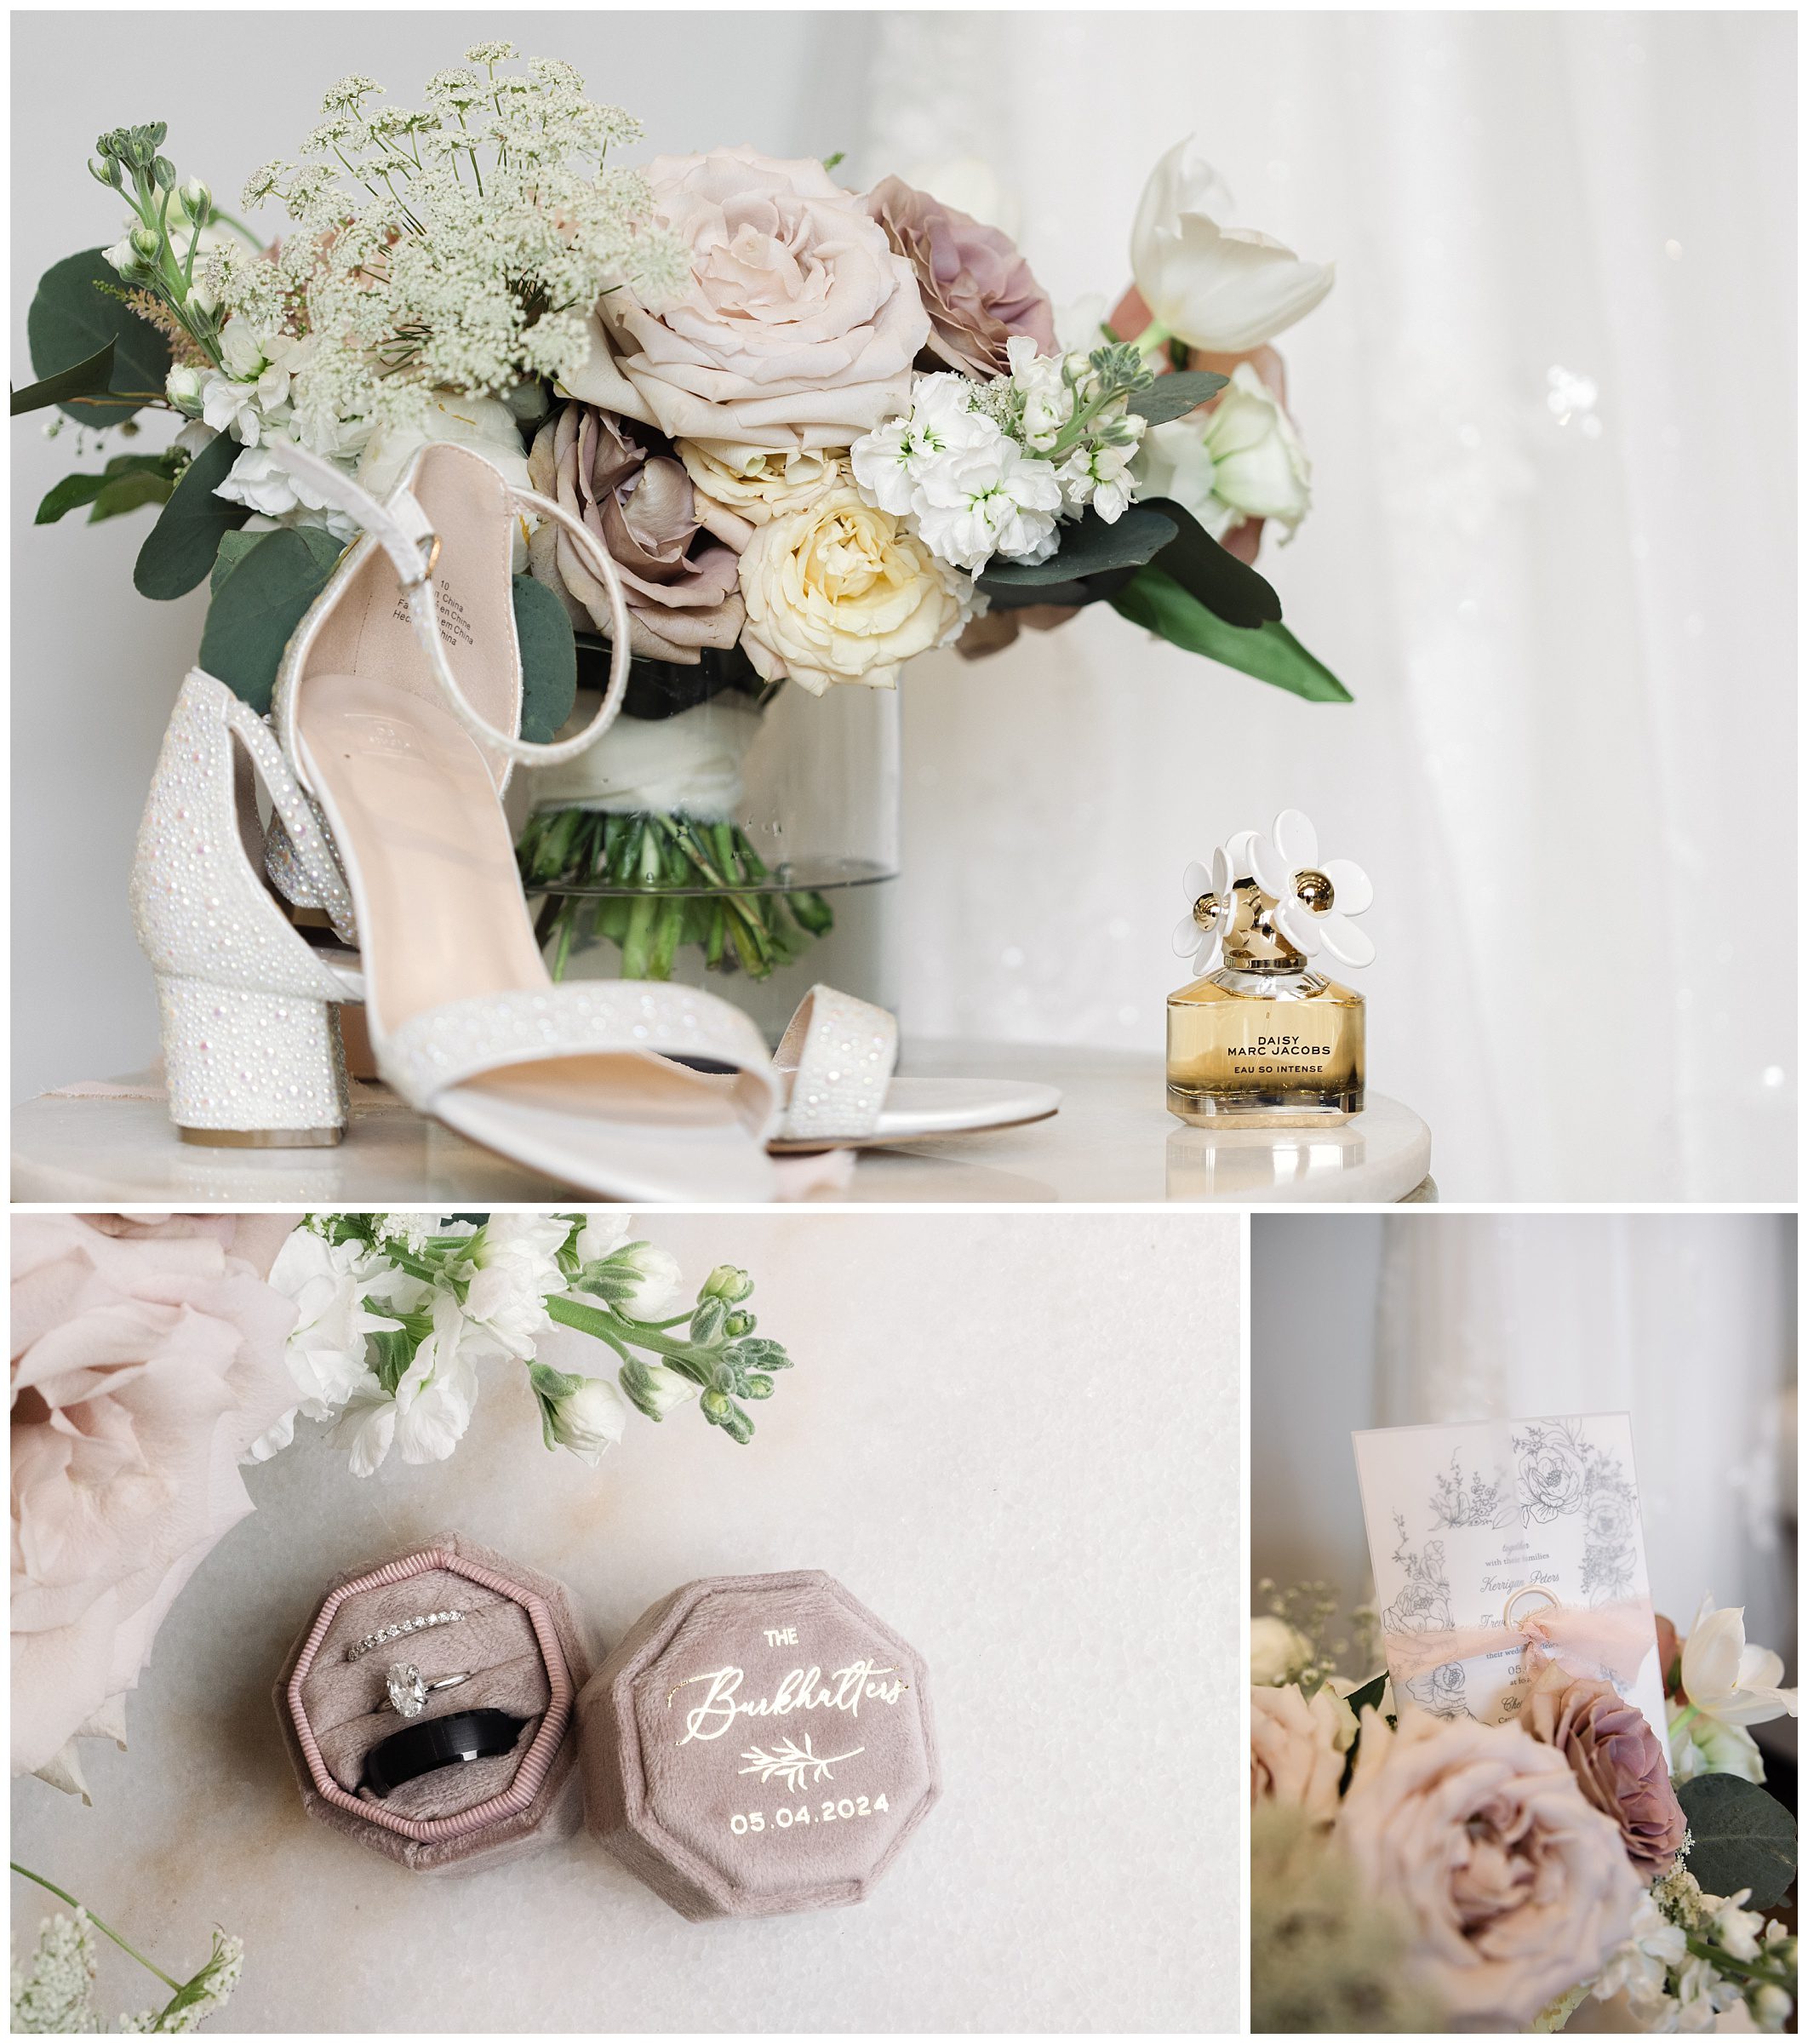 Collage of mountain wedding accessories: high-heeled shoes beside a bouquet, a hexagonal ring box, and an invitation card with flowers at Chestnut Ridge.